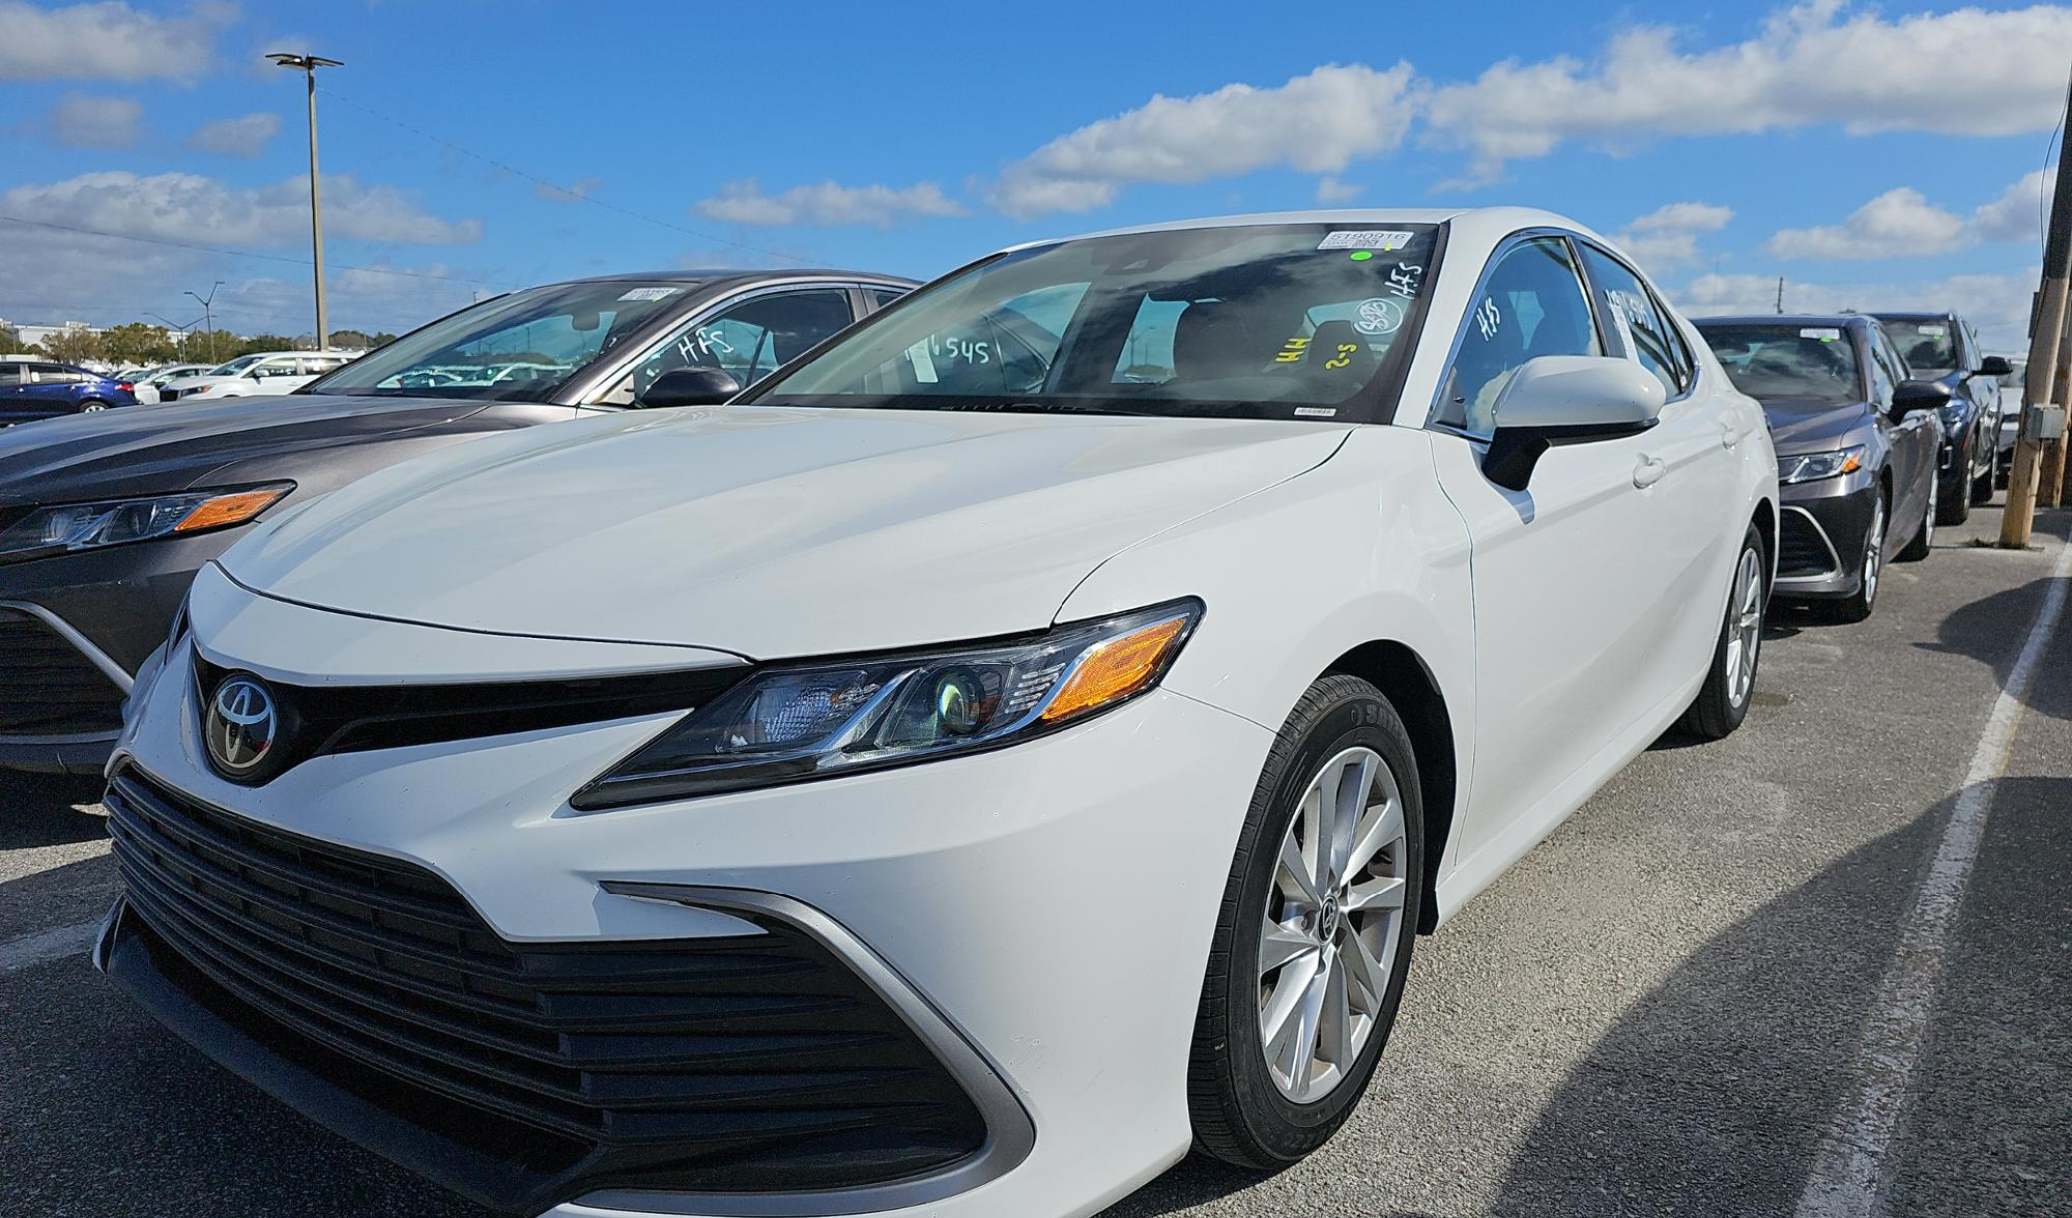 2021 Toyota Camry for sale in Gainesville FL 32609 by Veneauto Cars